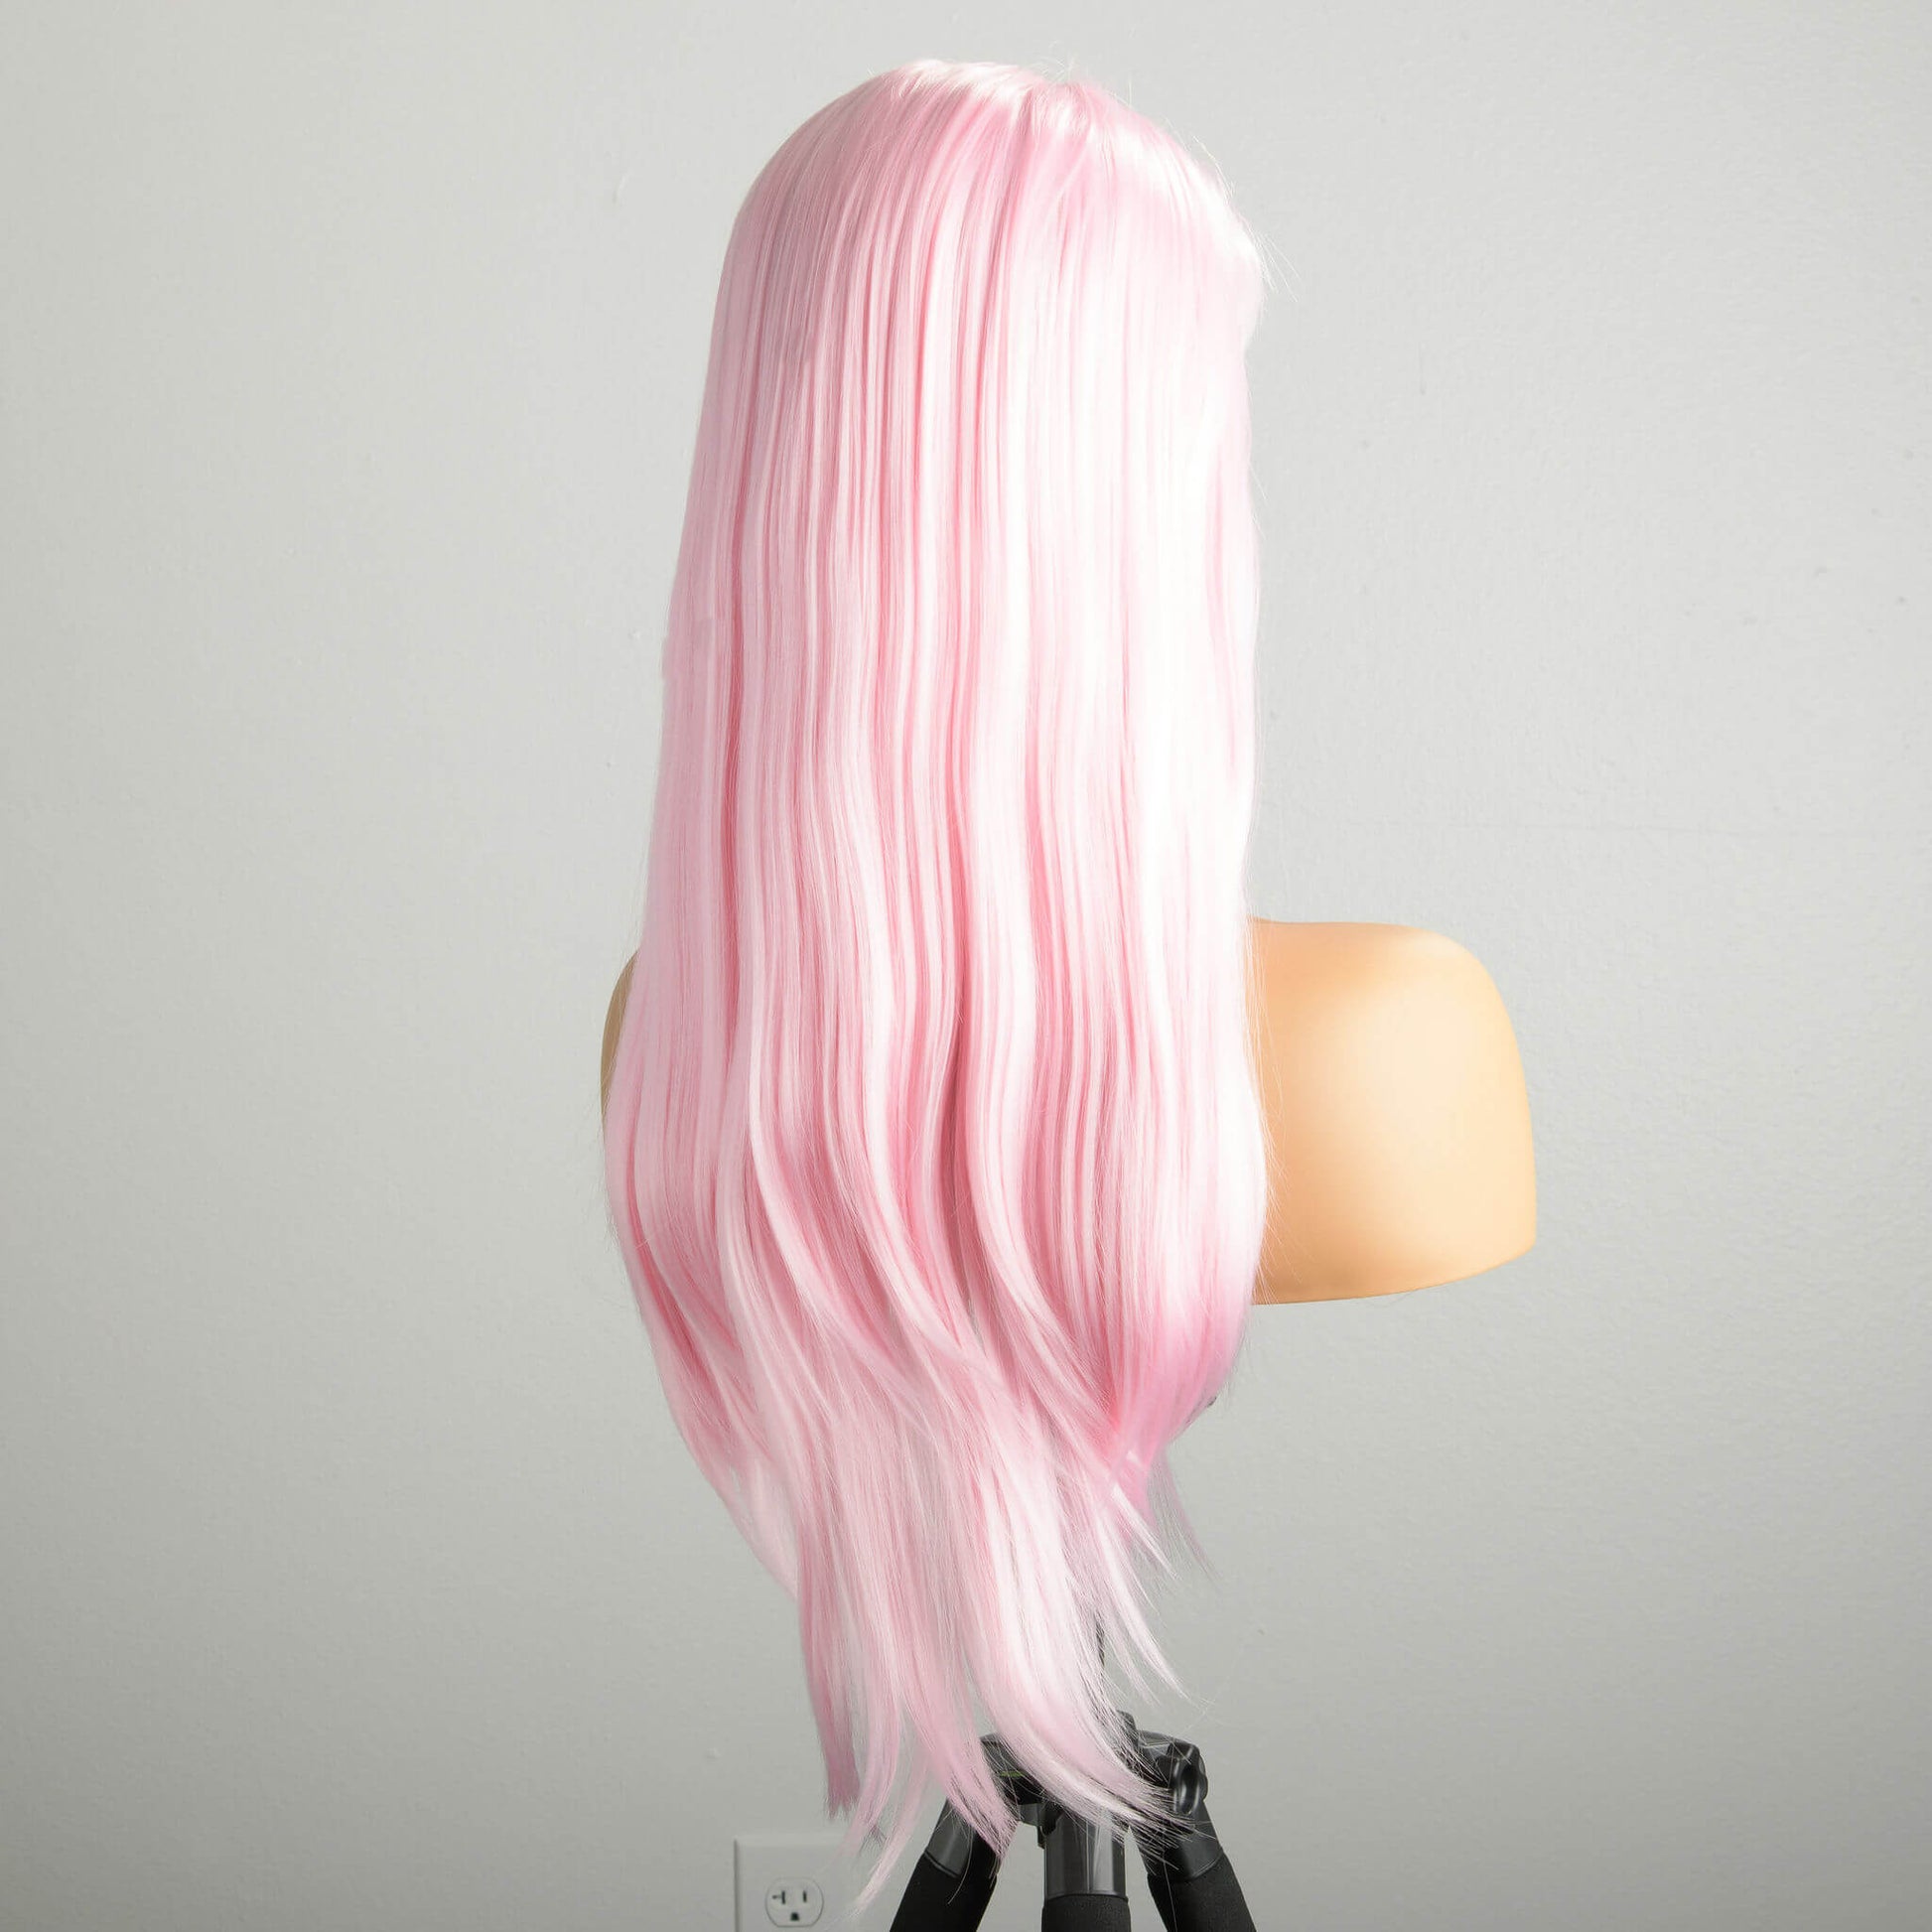 "Carina Nebula" | Synthetic Wig with Bangs | Long Straight Pink Wig